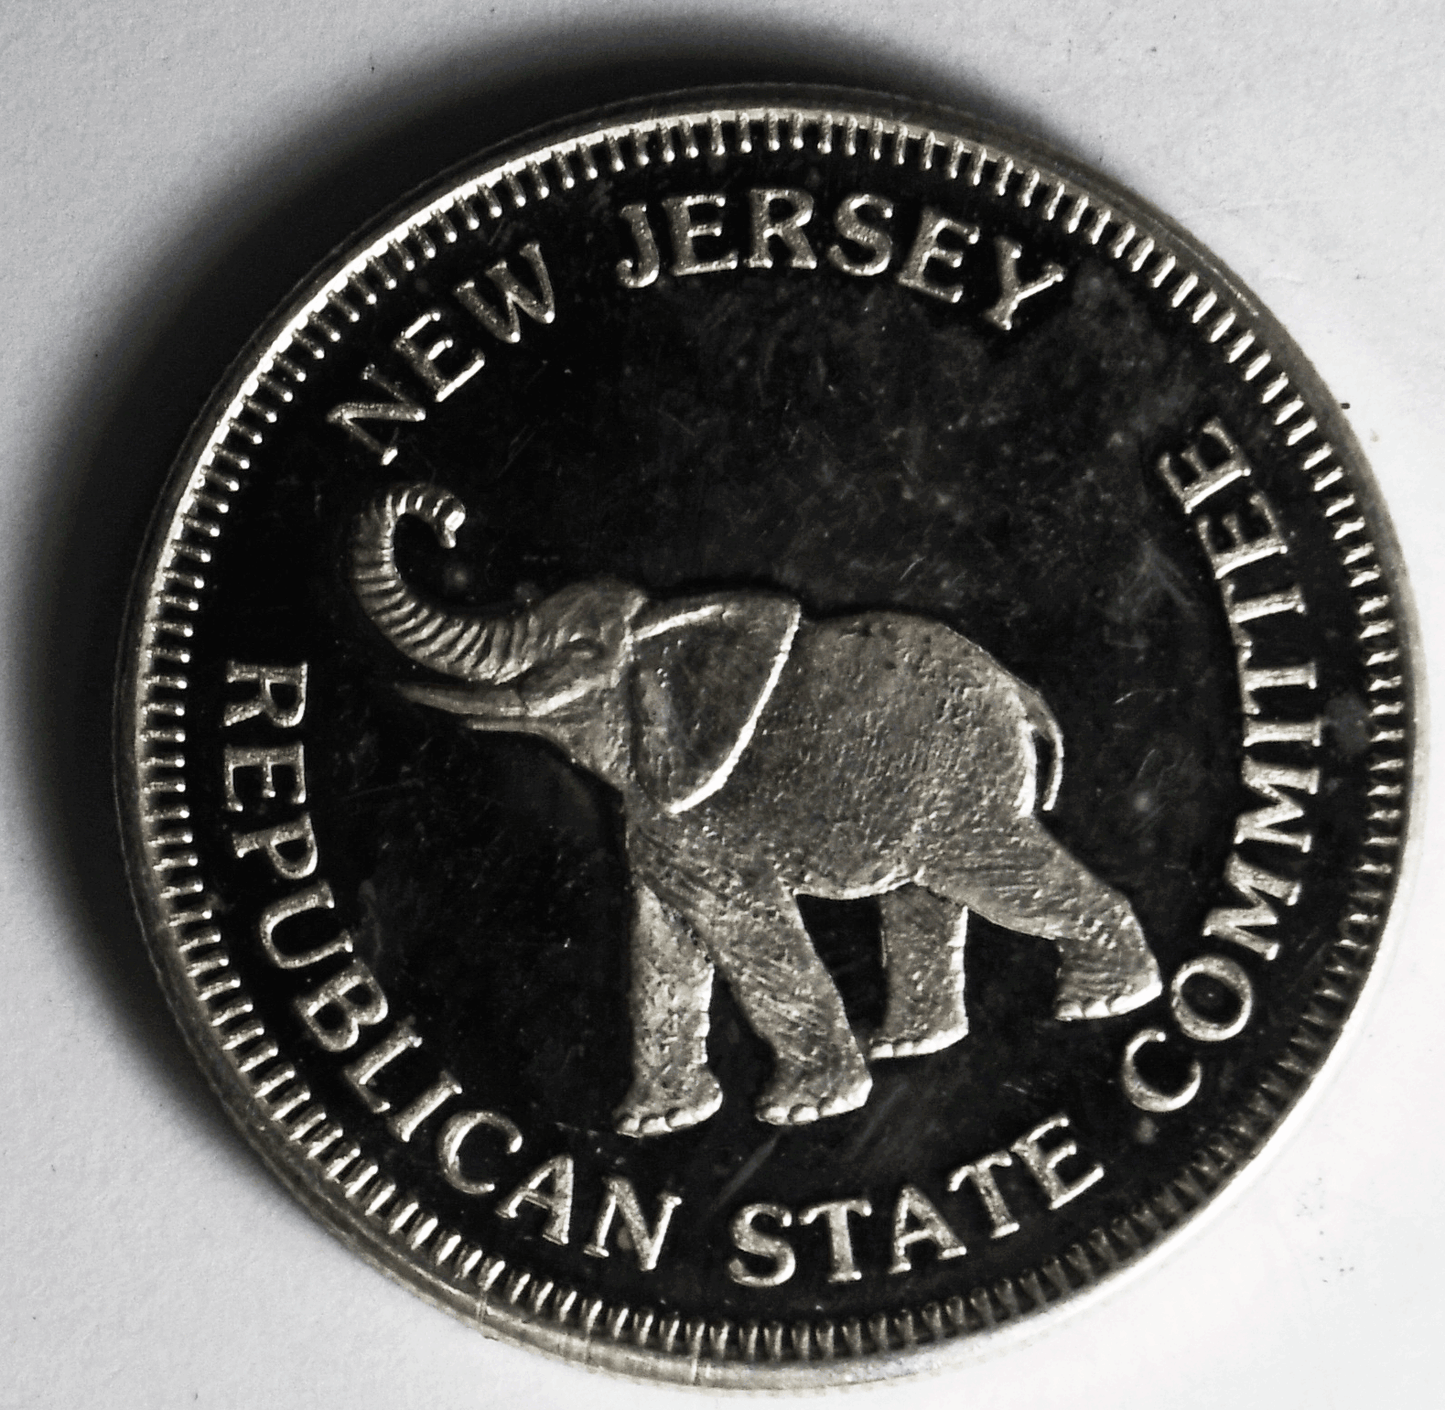 Governor Tom Kean 1982-1990 Republican Committee NJ  .999 1 ozt. Silver Round